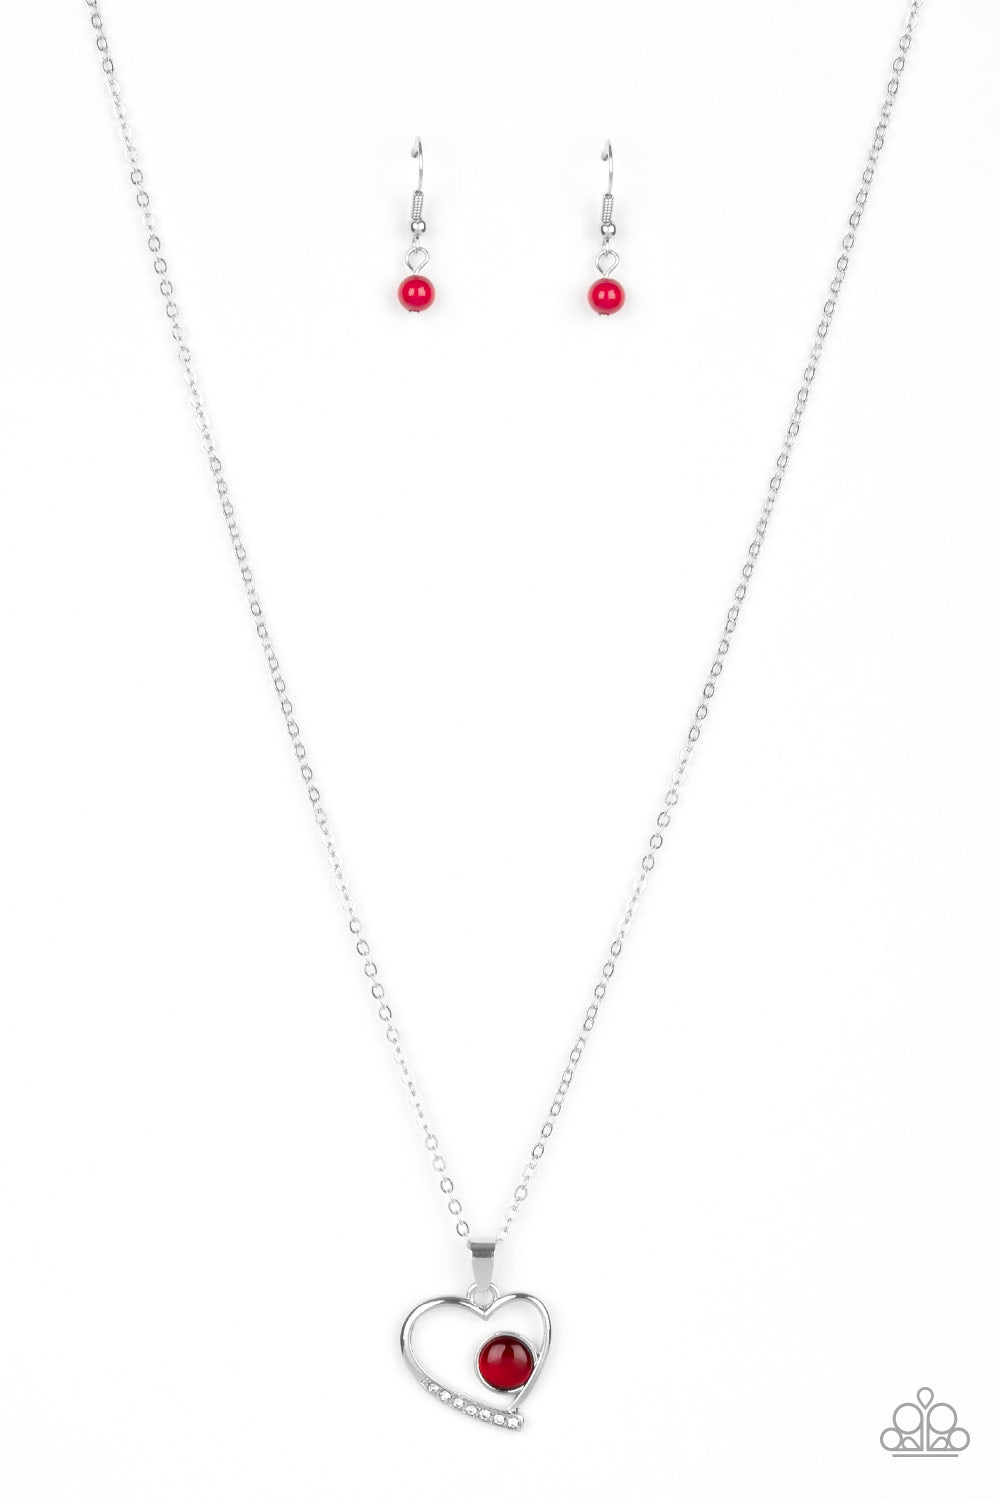 Heart Full of Love Necklace__Red